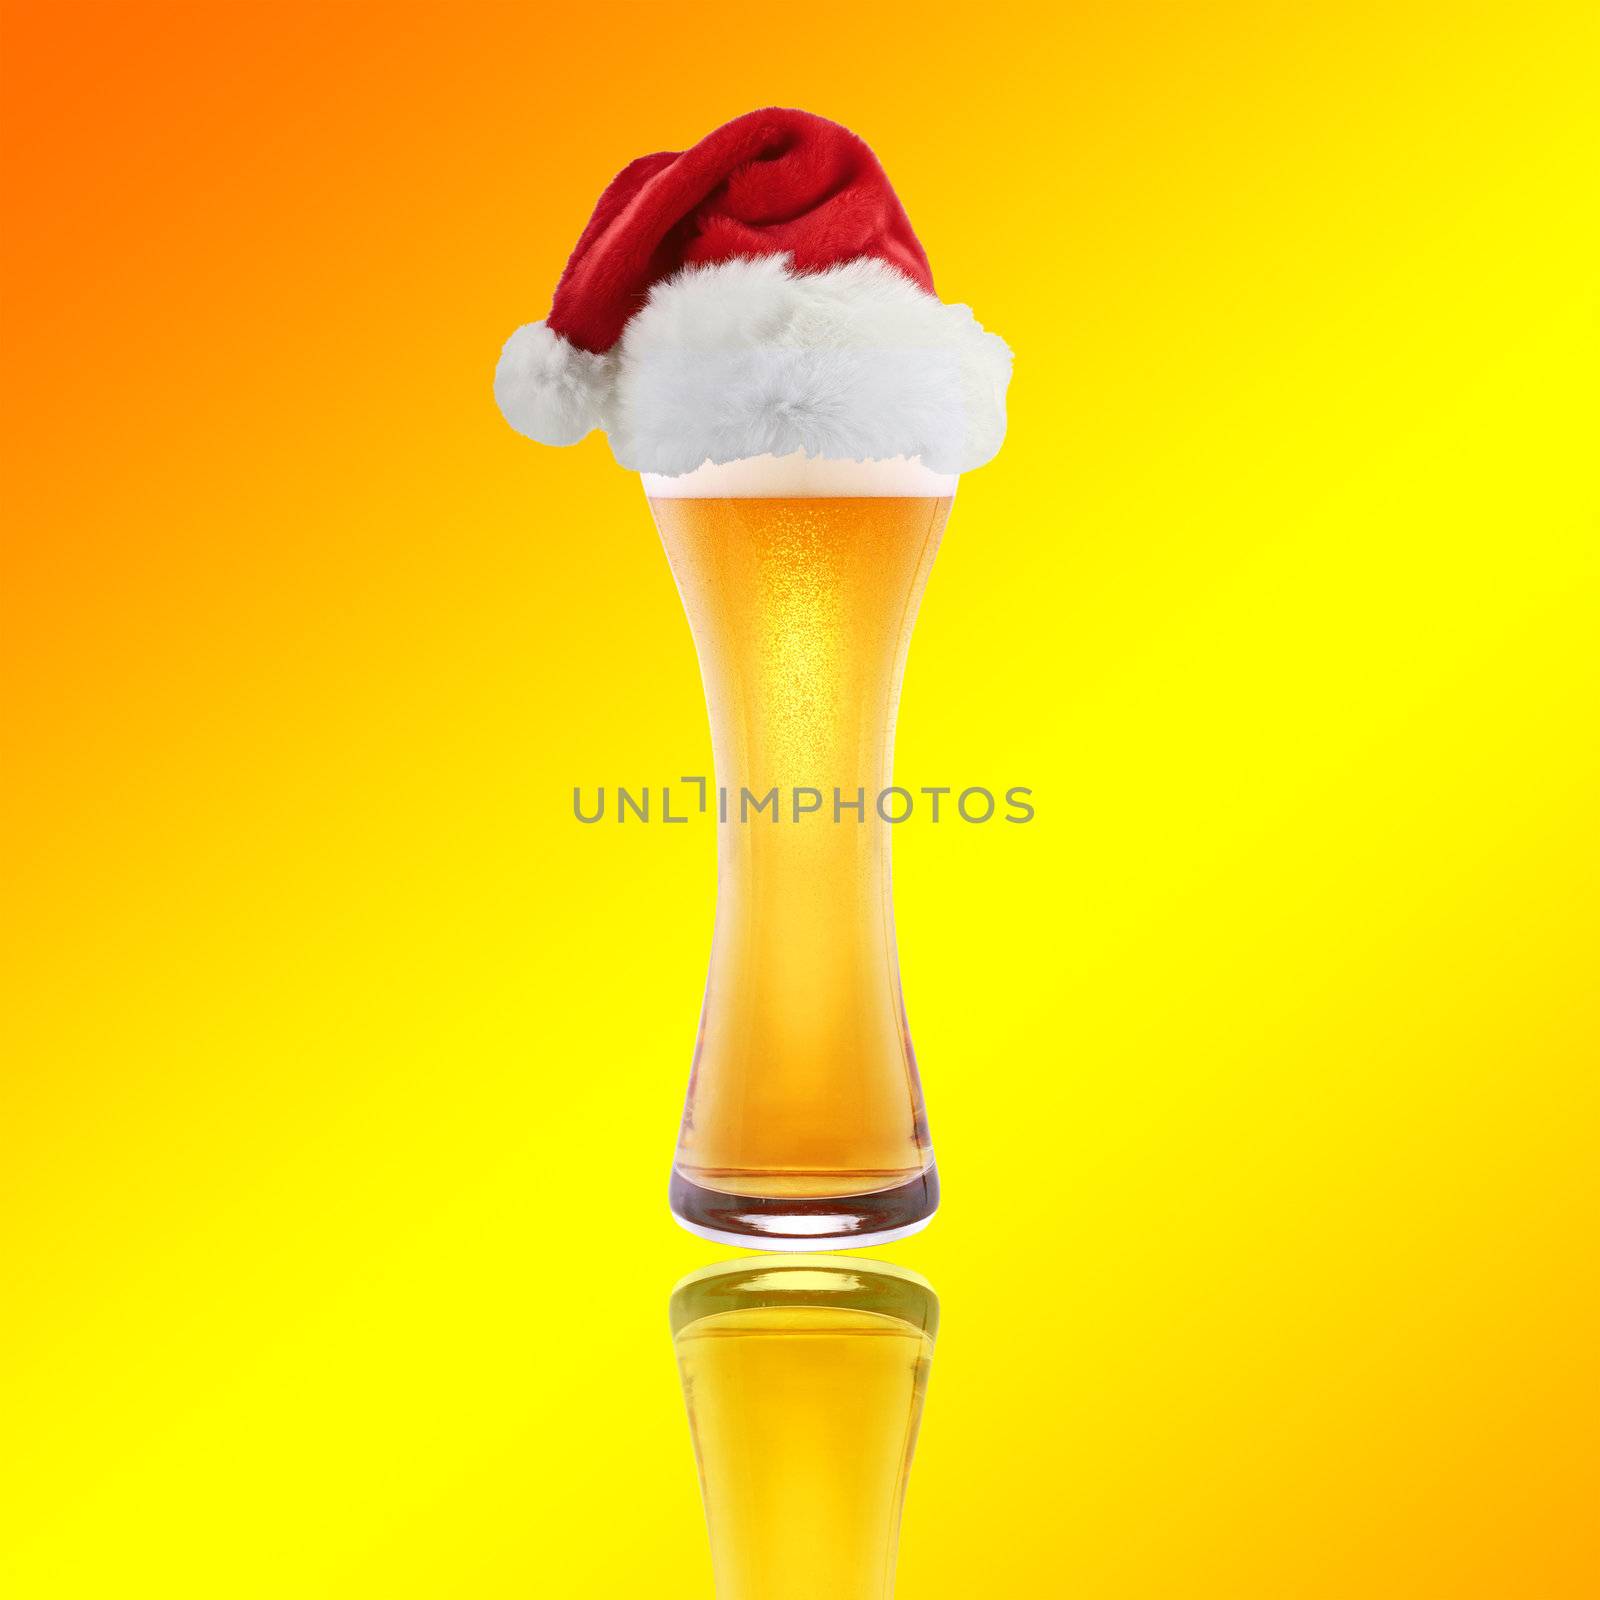 Santa Claus hat with beer on a yellow background by ozaiachin